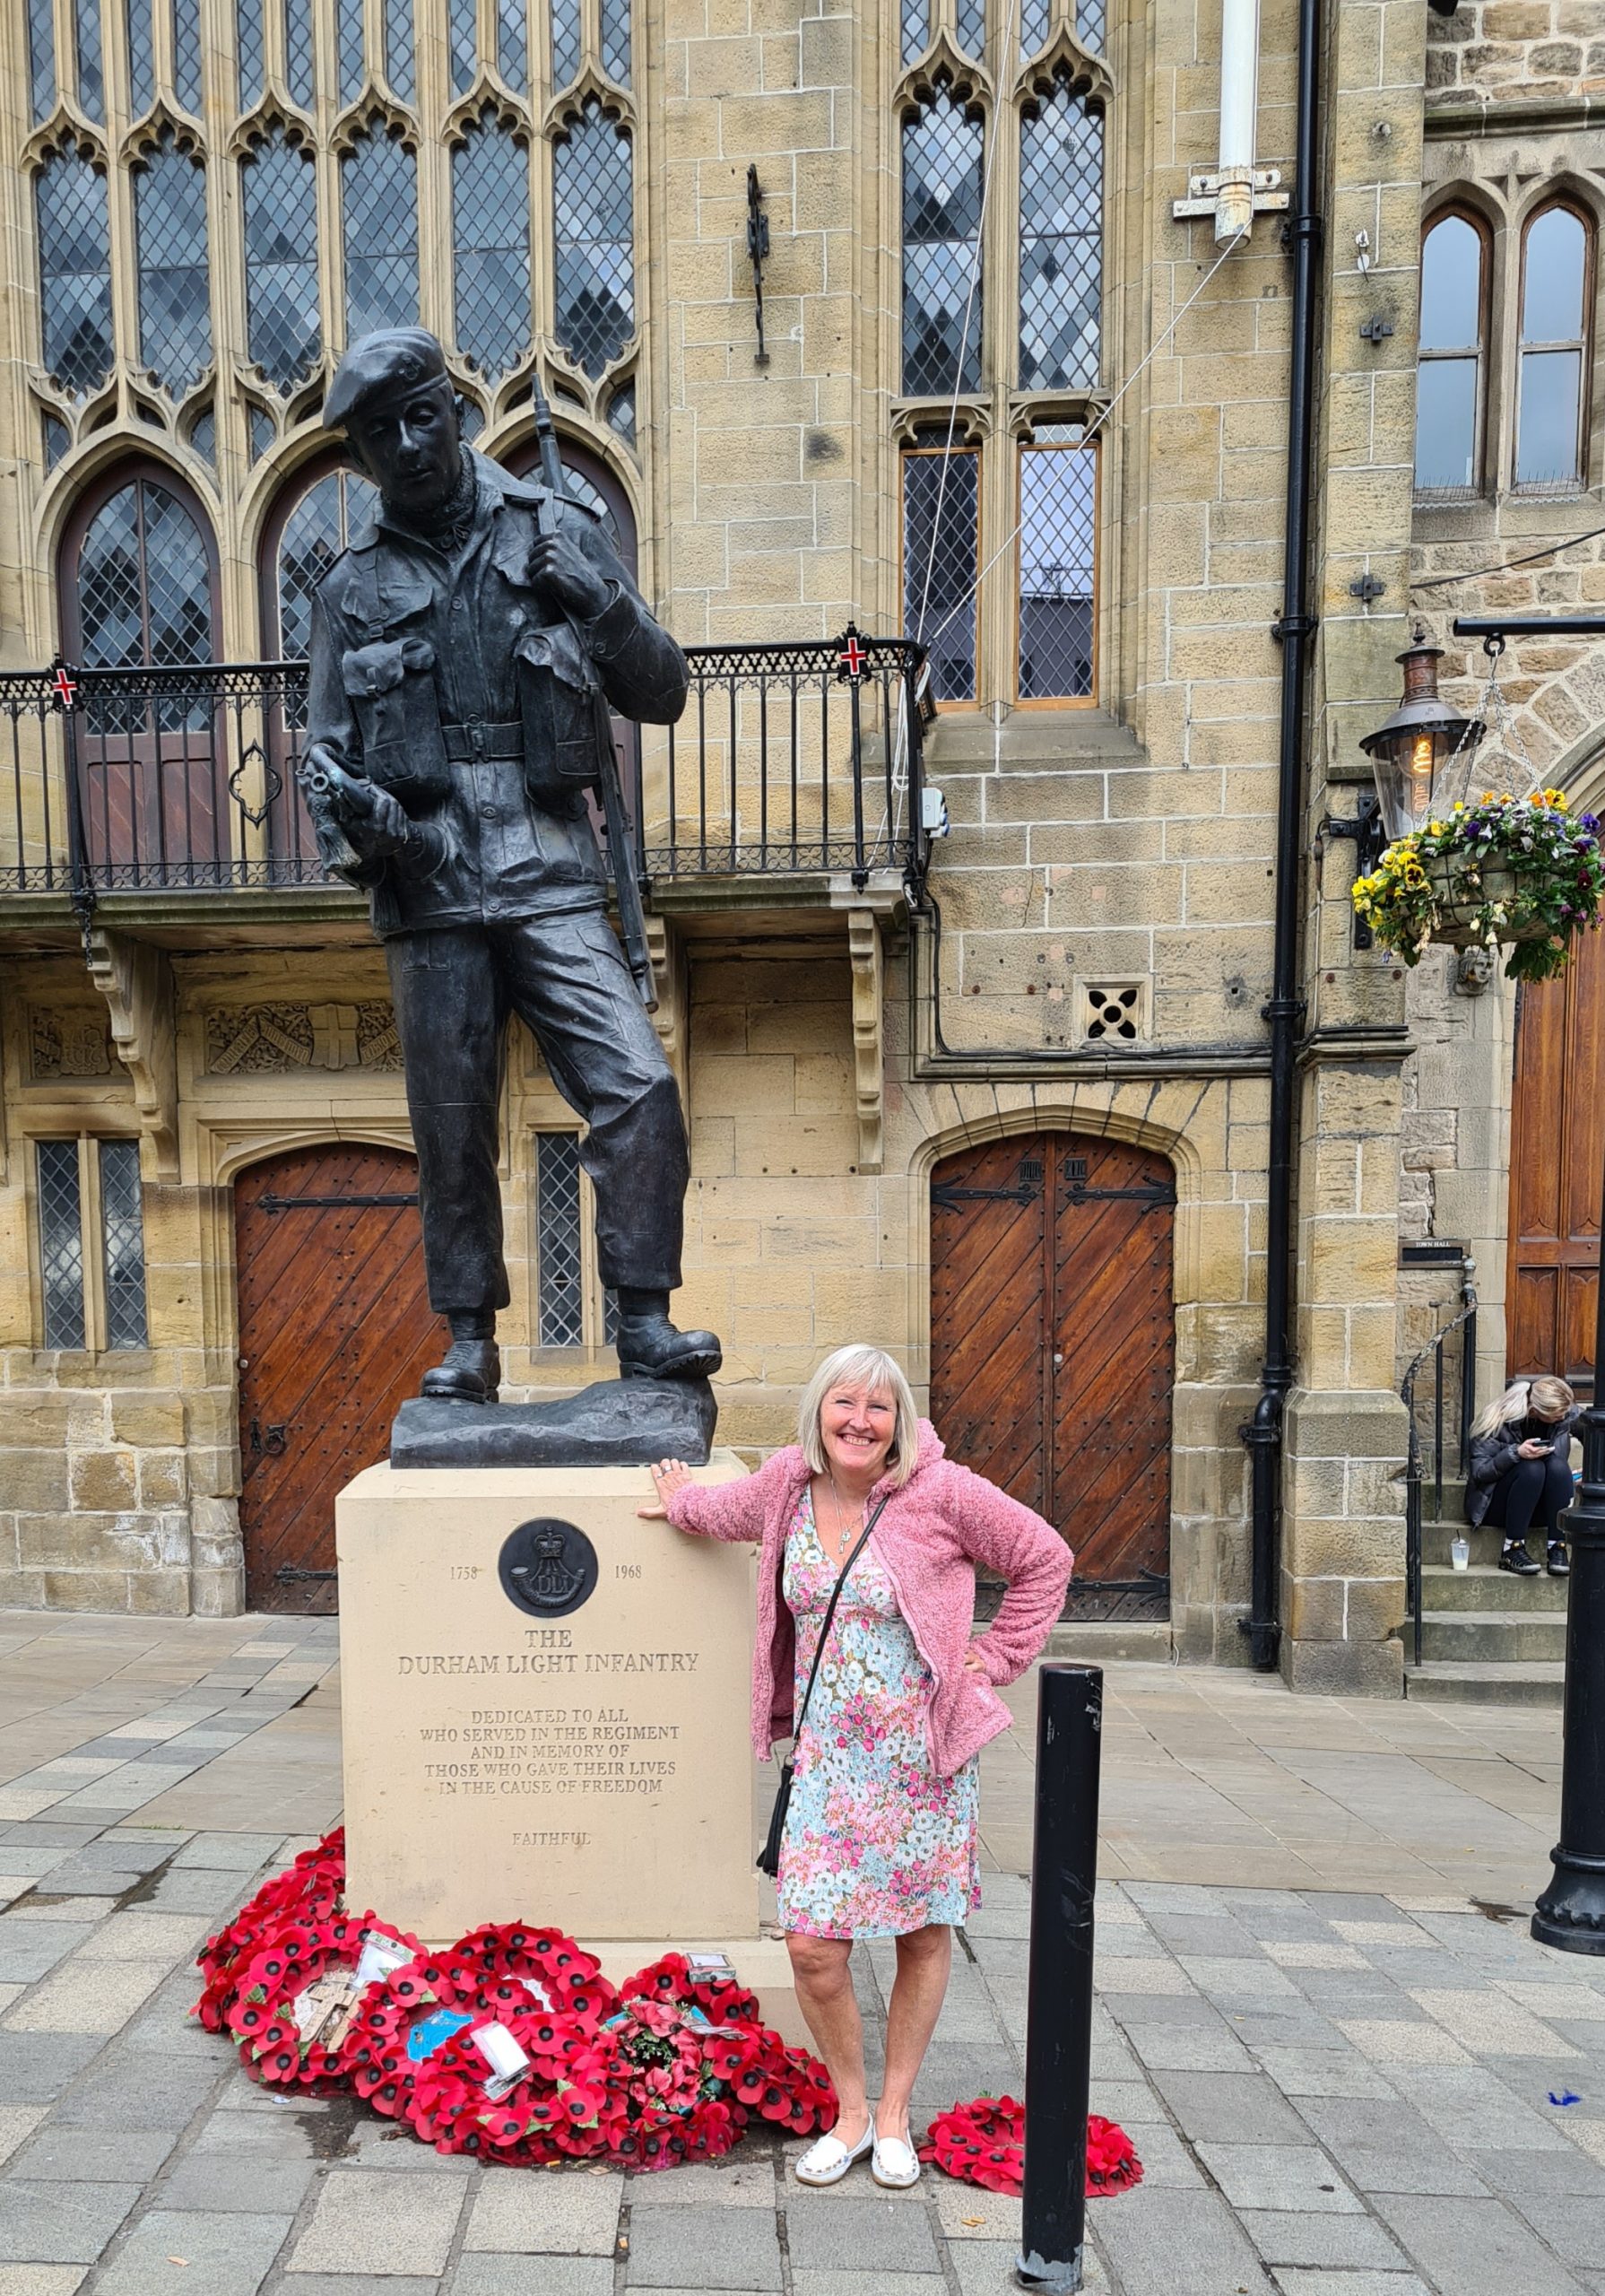 Me by the war memorial in Durham, United Kingdom